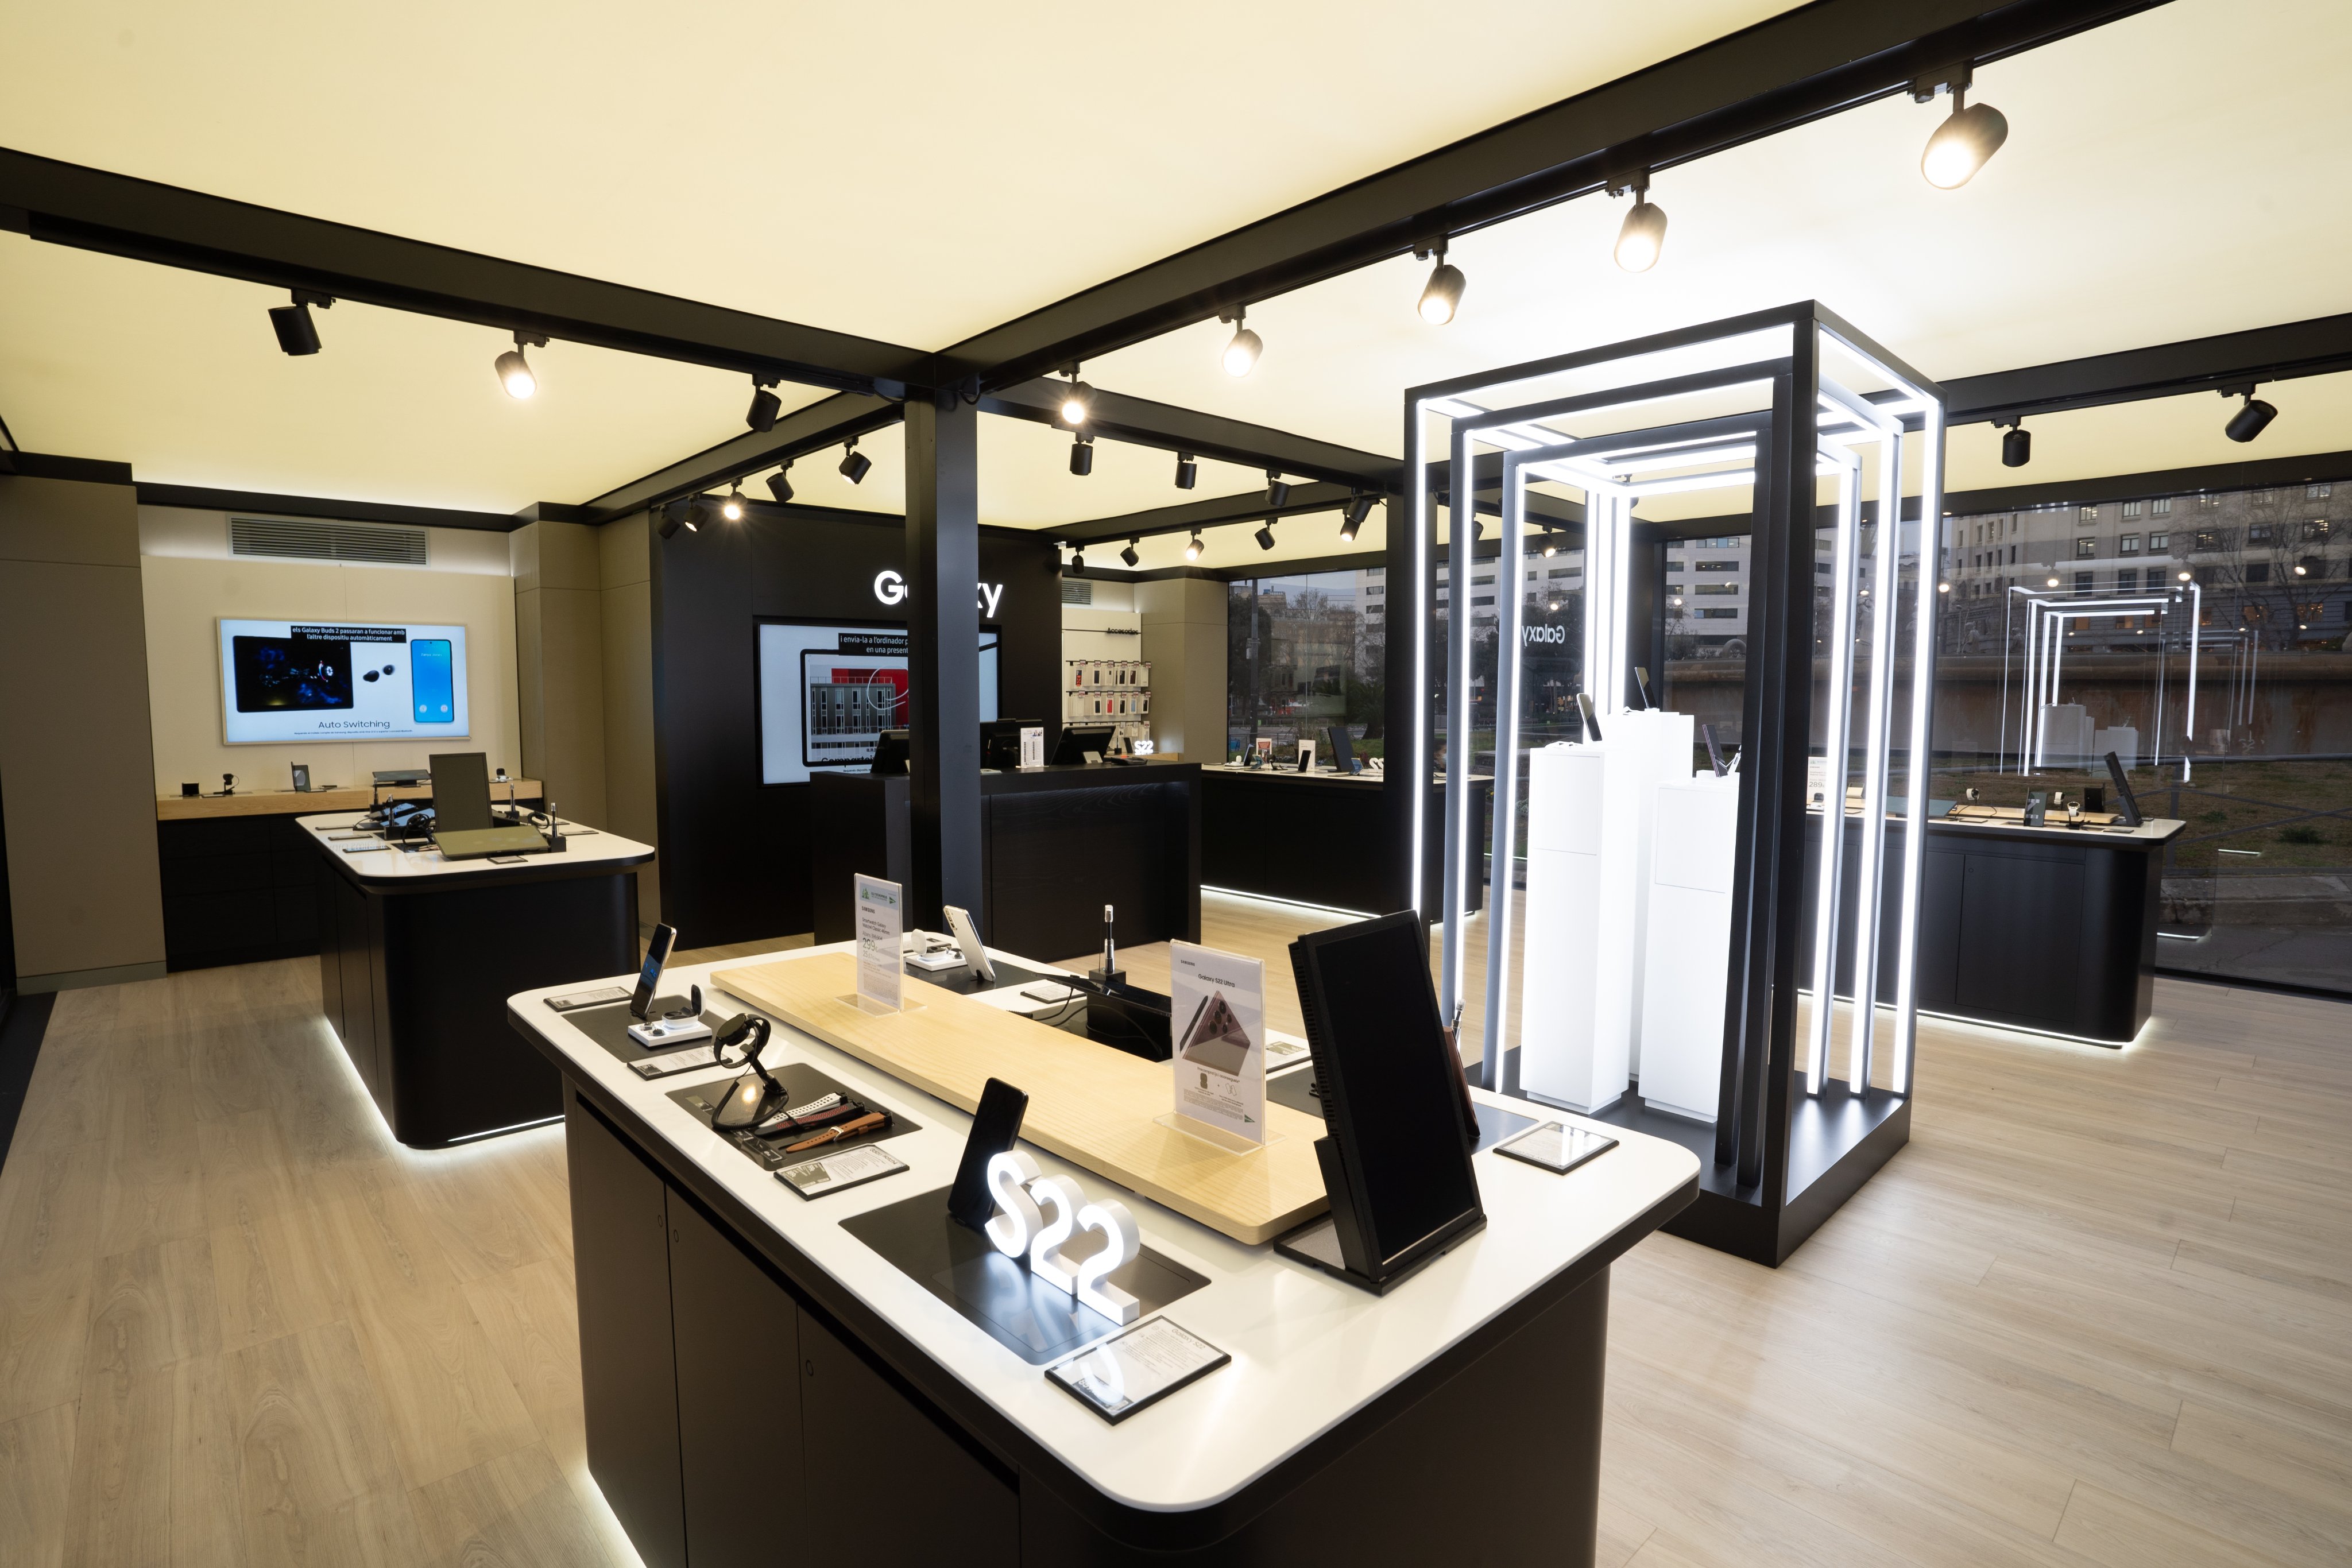 Cheil Spain on X: The Galaxy Pop-Up Store in Plaça de Catalunya is one of  the creations of our retail team for #MWC. This Samsung experience in the  heart of Barcelona is